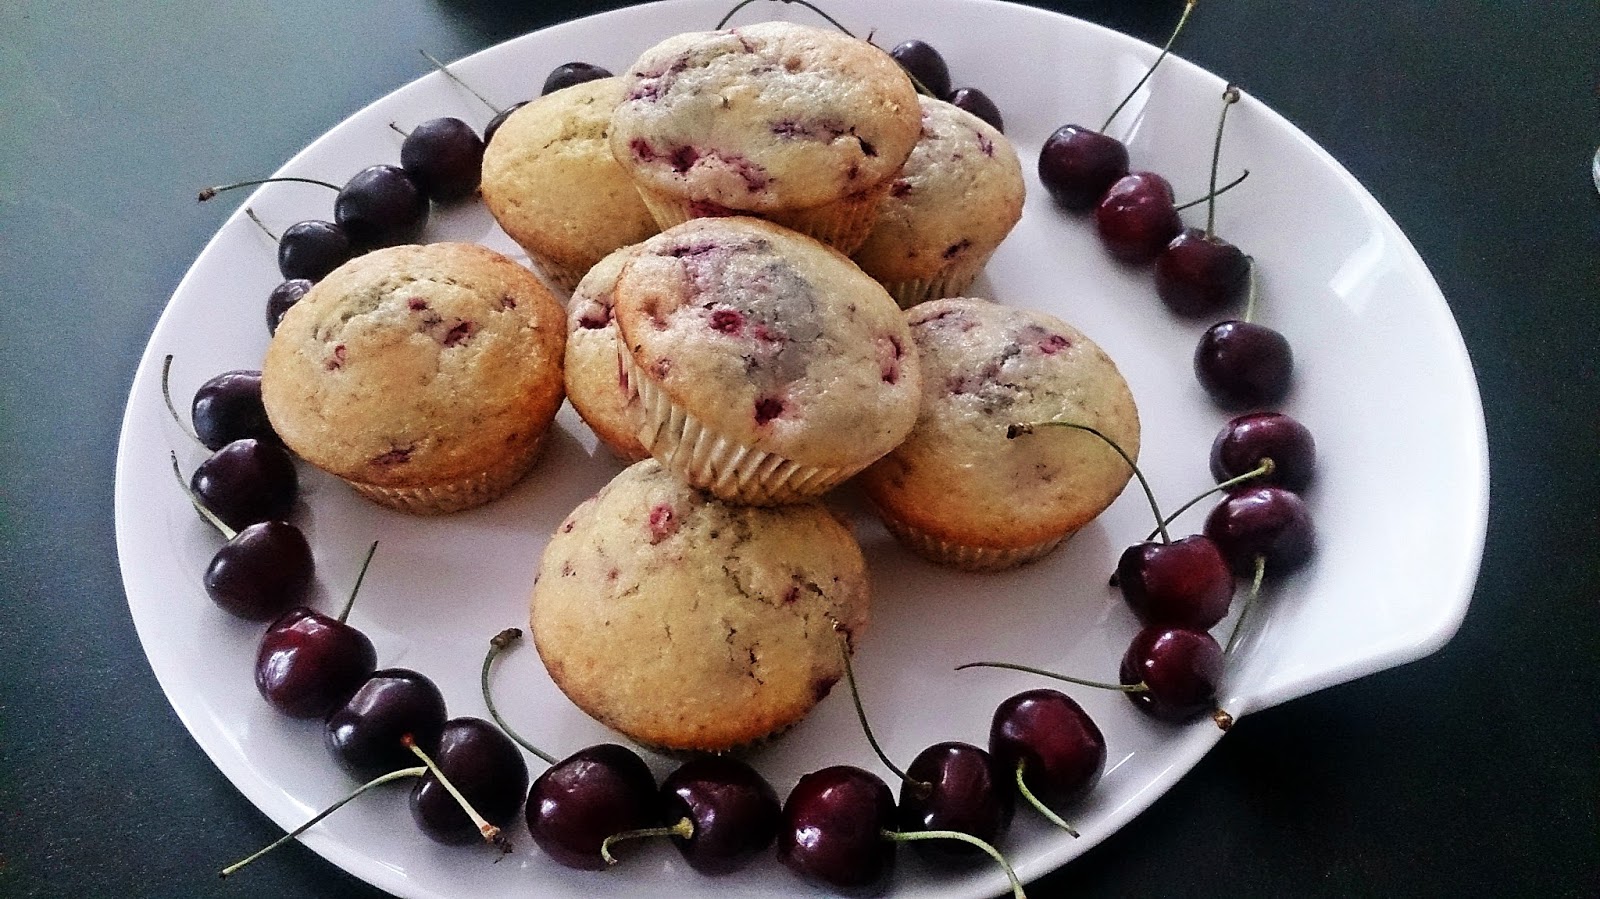 Sugar and Spice: Himbeer-Buttermilch-Muffins